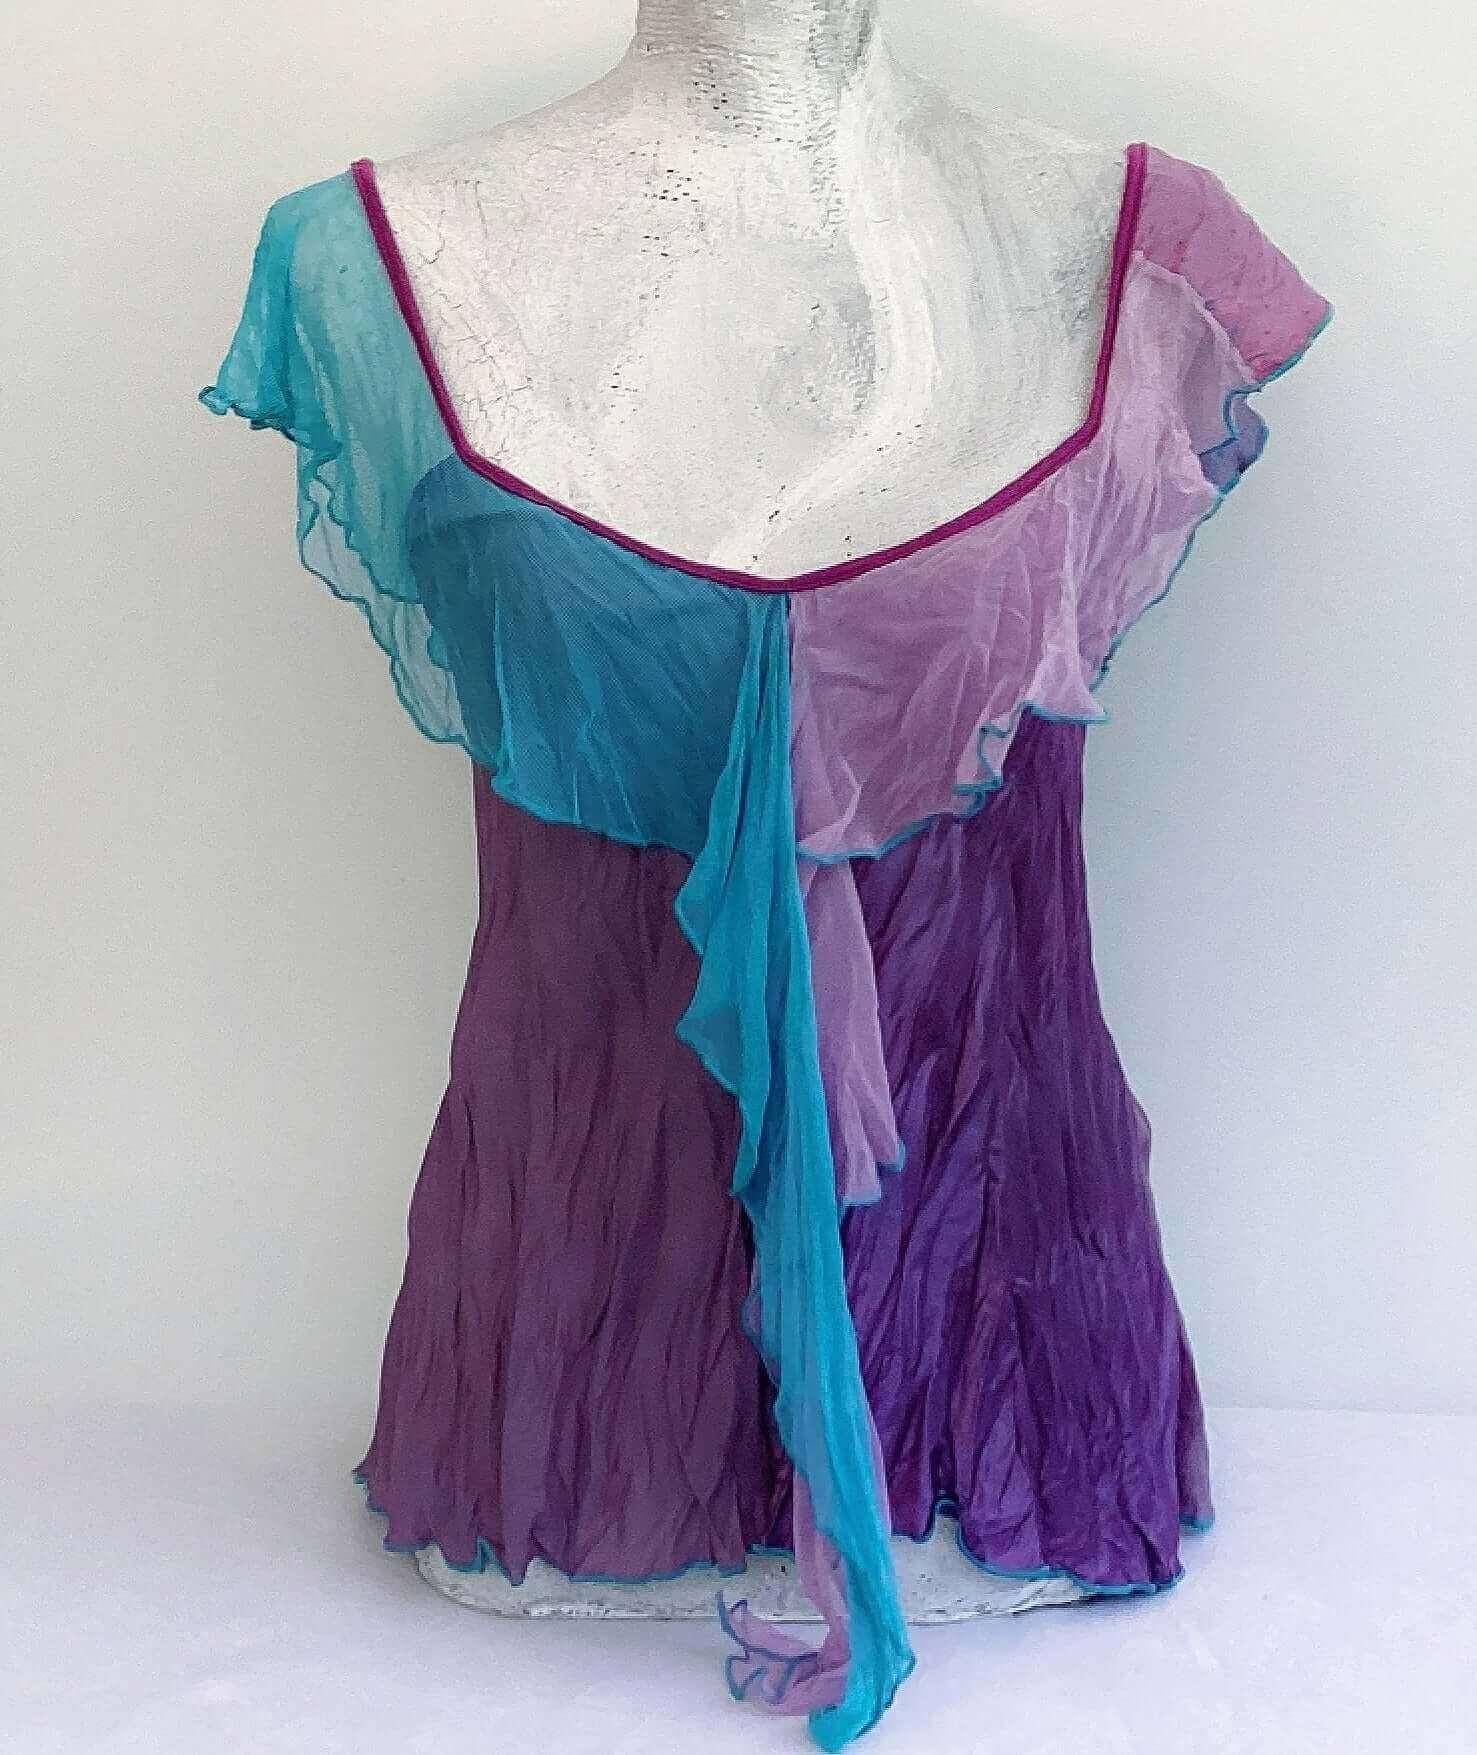 Front view of camisole, contrasting, patterned, wide chiffon frill straps, joining at center bust, flowing down in front.